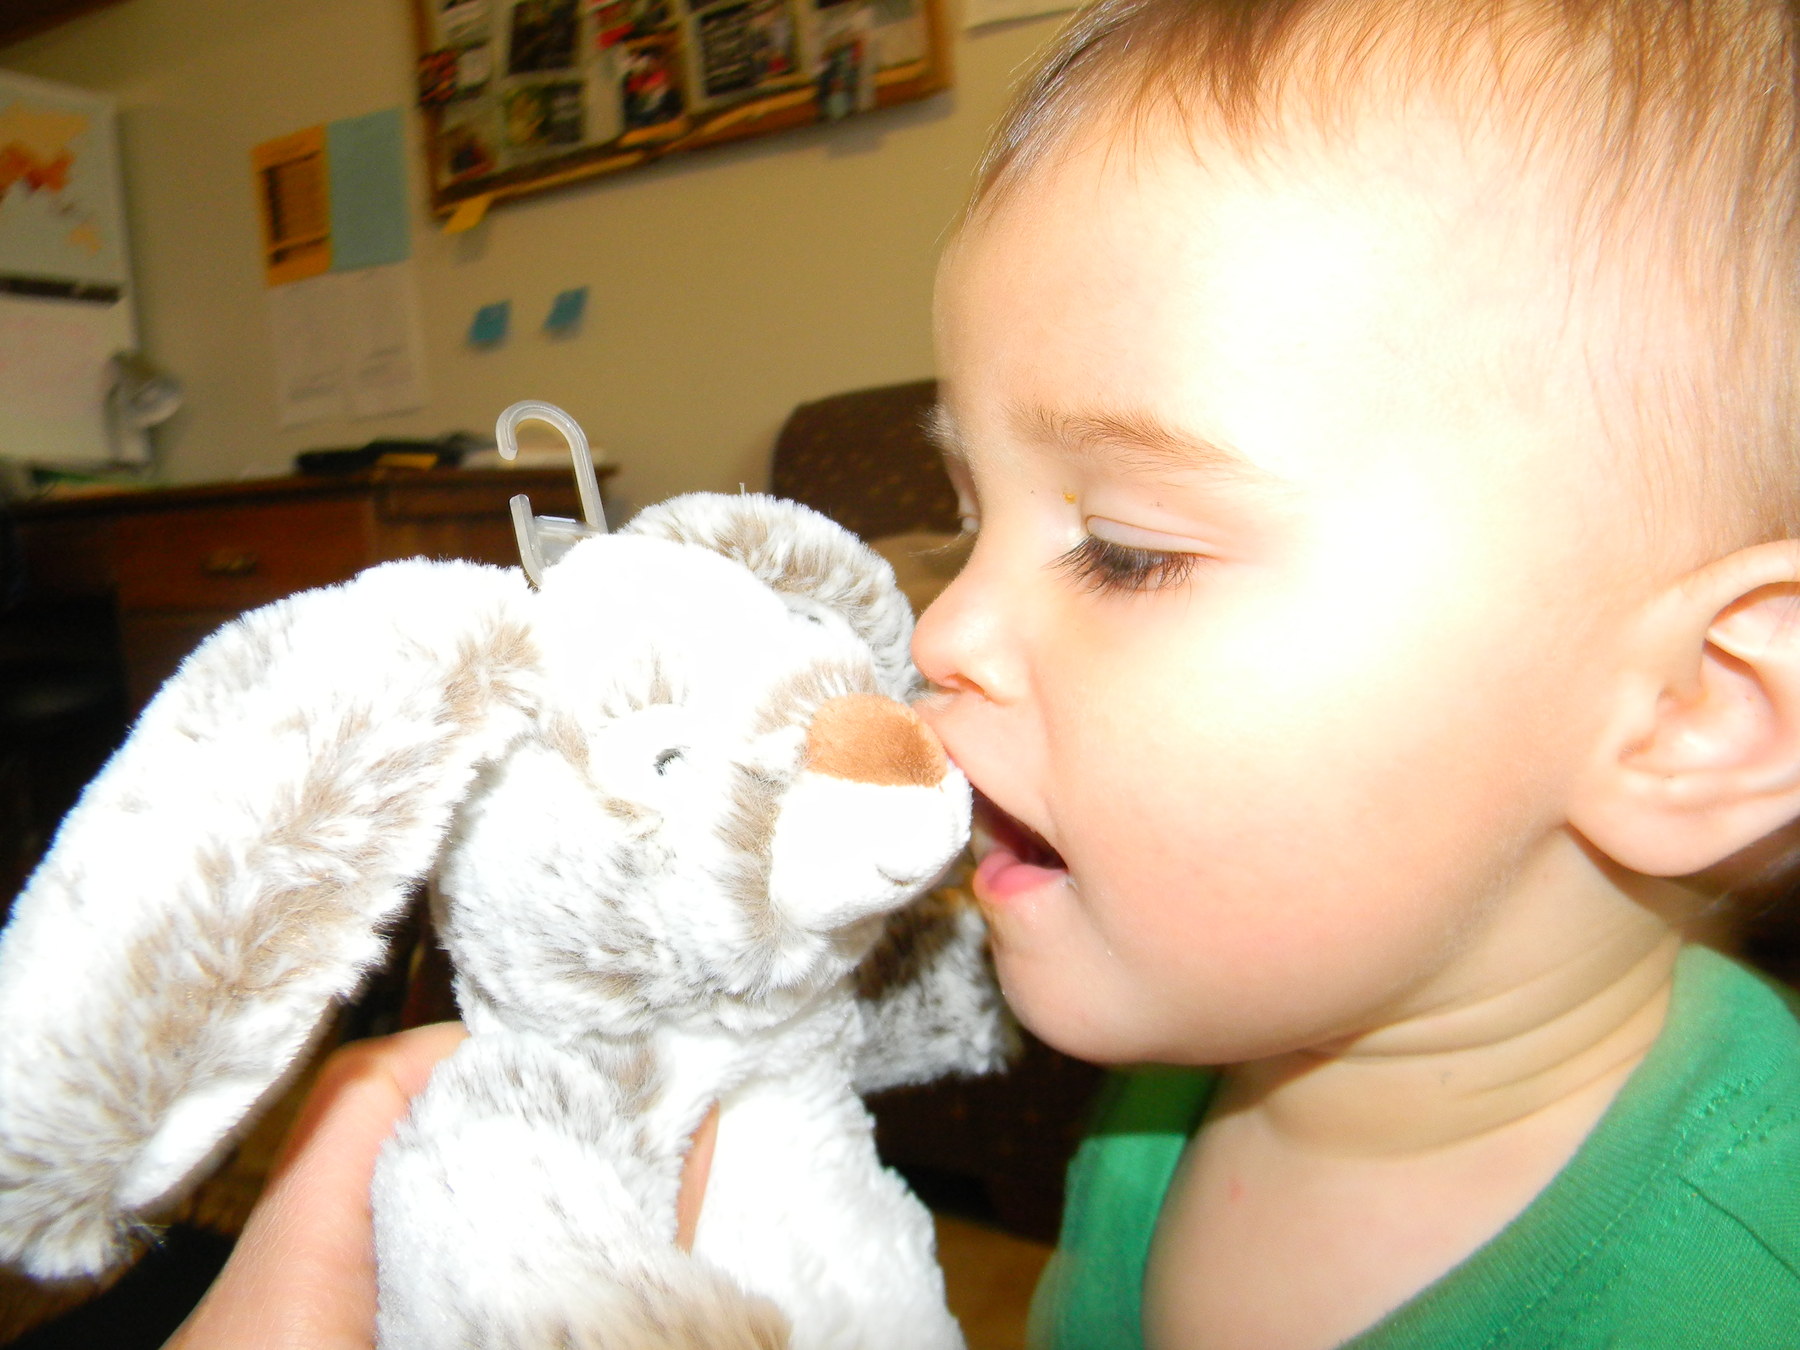 Kisses for his new bunny